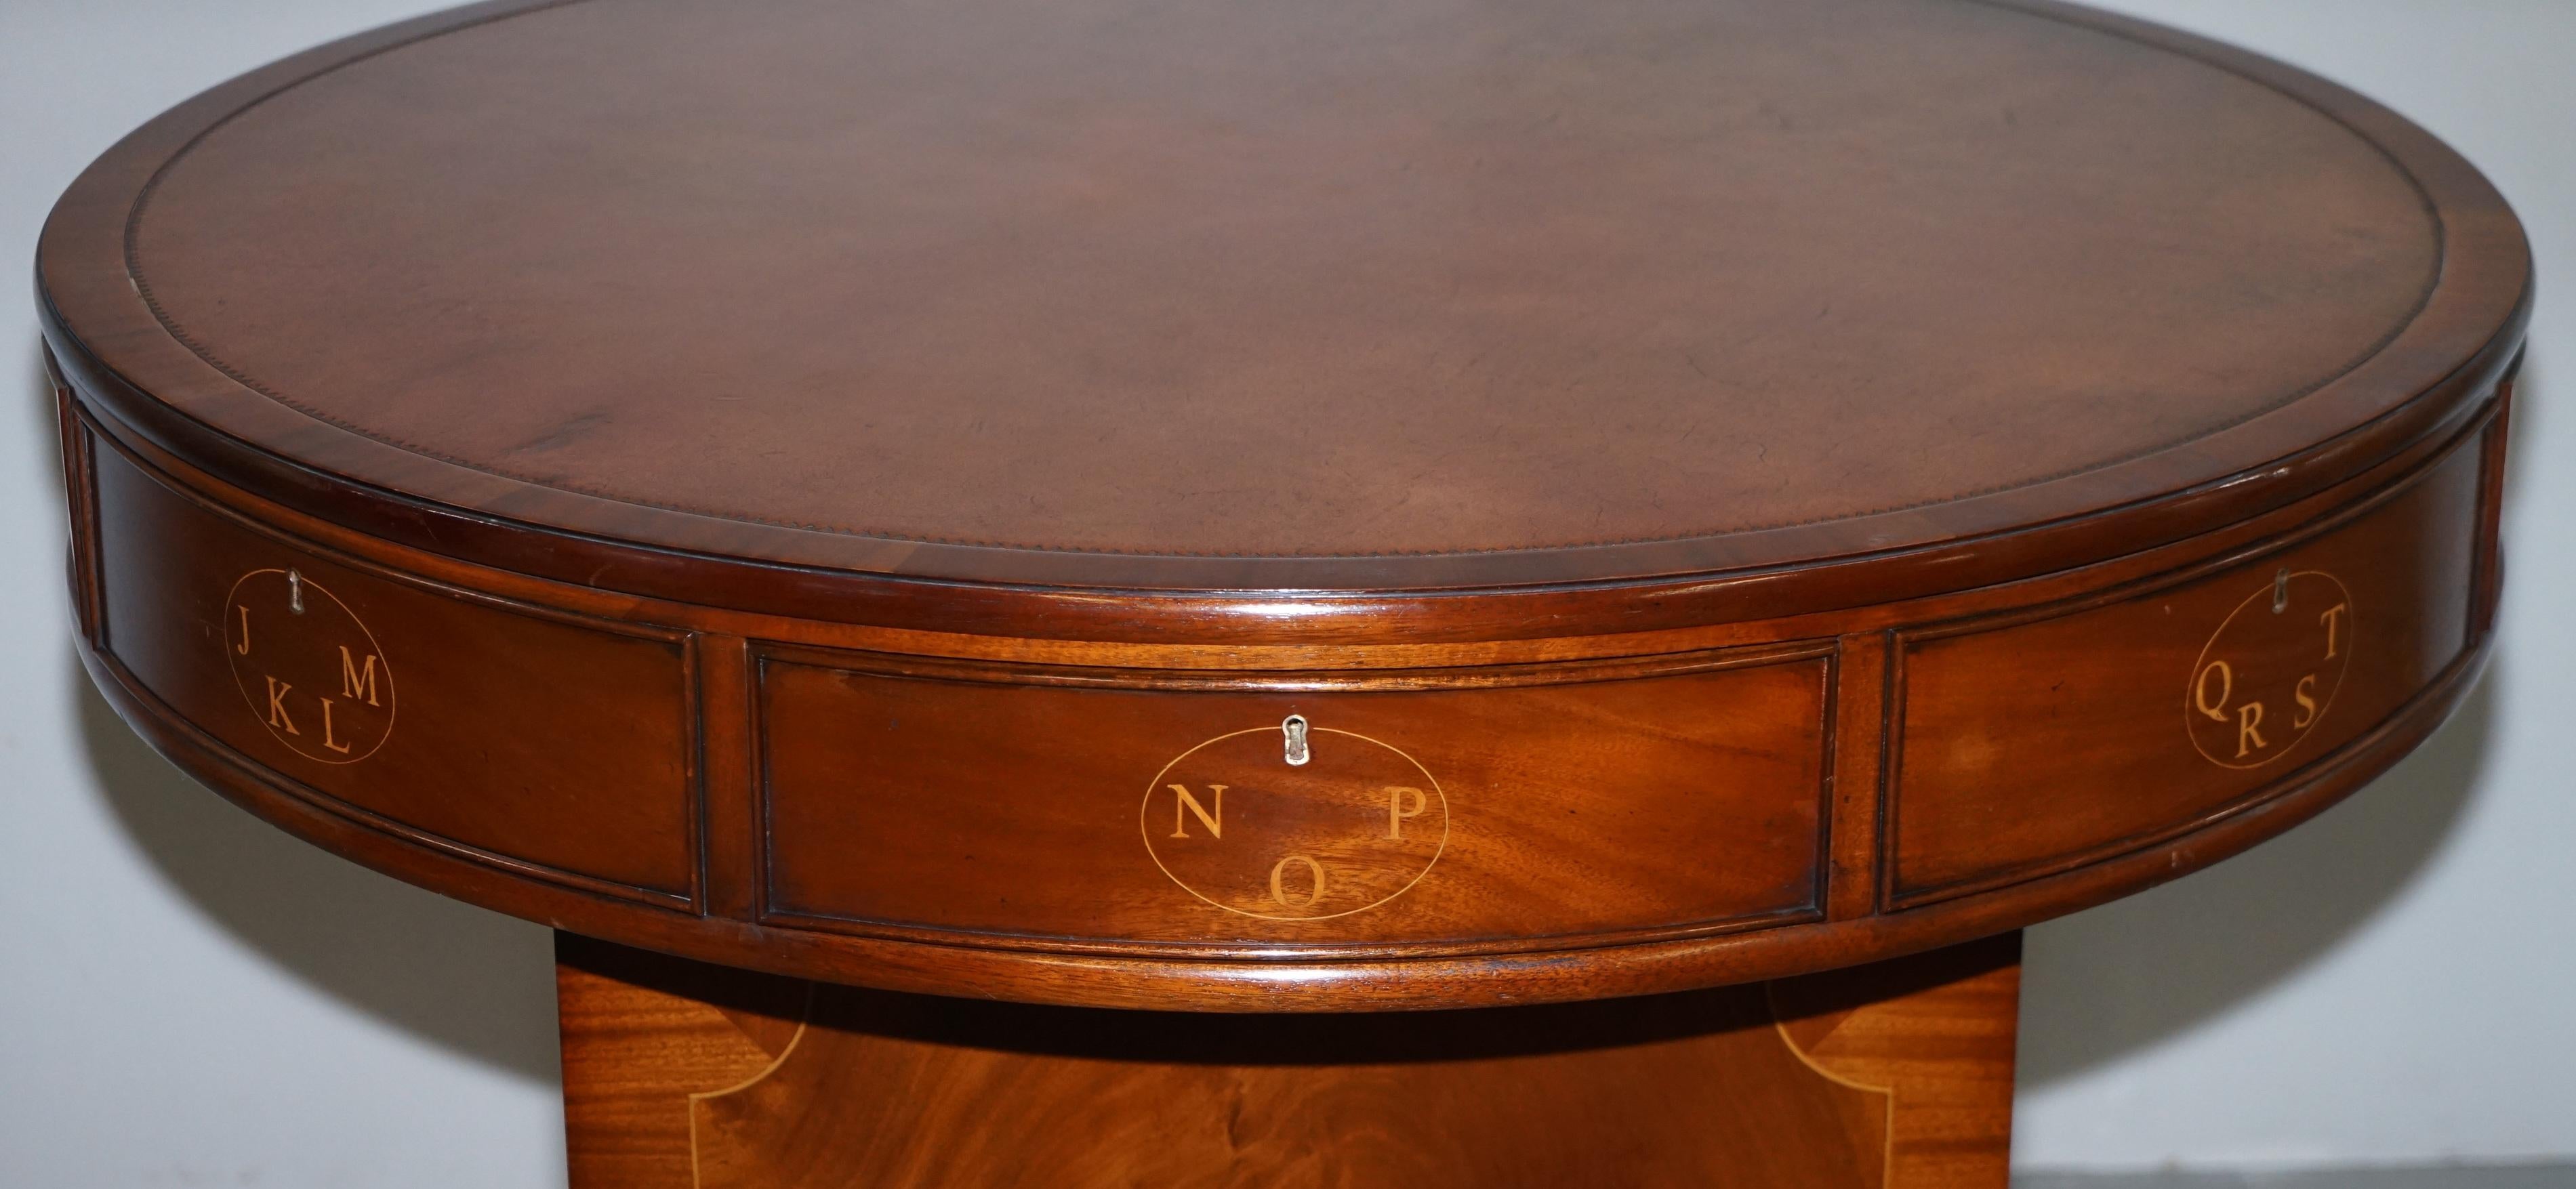 20th Century Vintage Flamed Mahogany Rent Drum Table Brown Leather Top Regency Style Fine